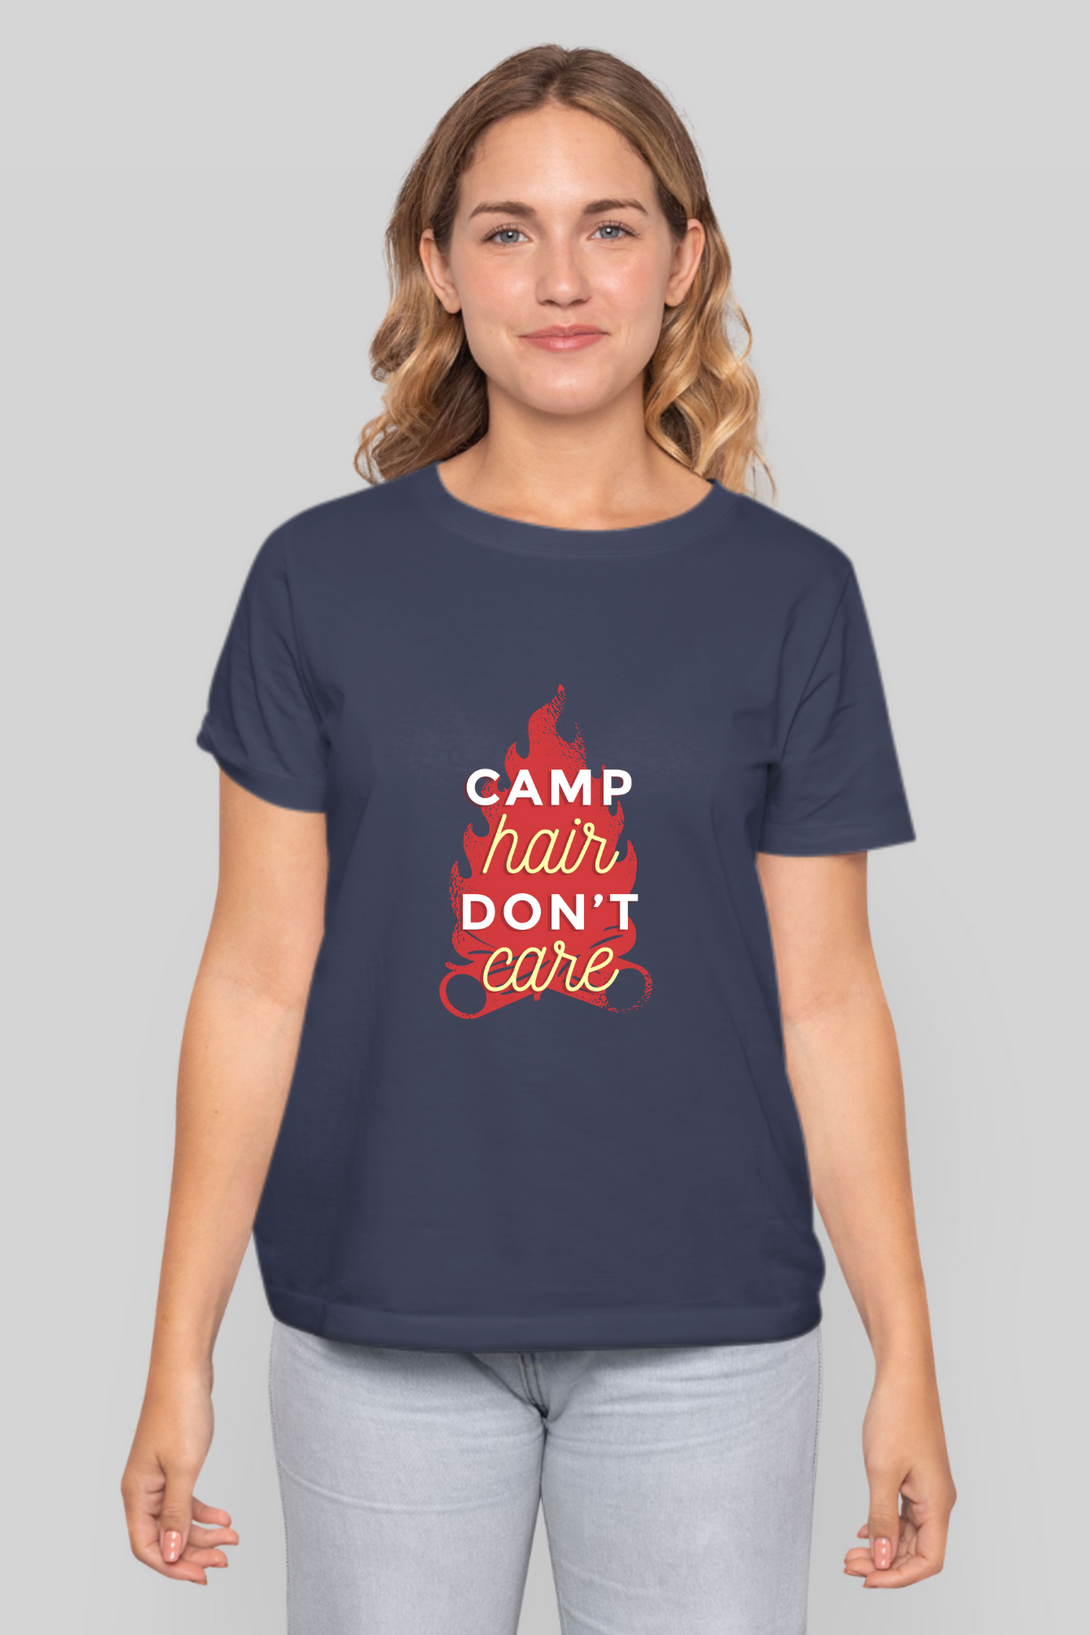 Camping Vibes Printed T-Shirt For Women - WowWaves - 13